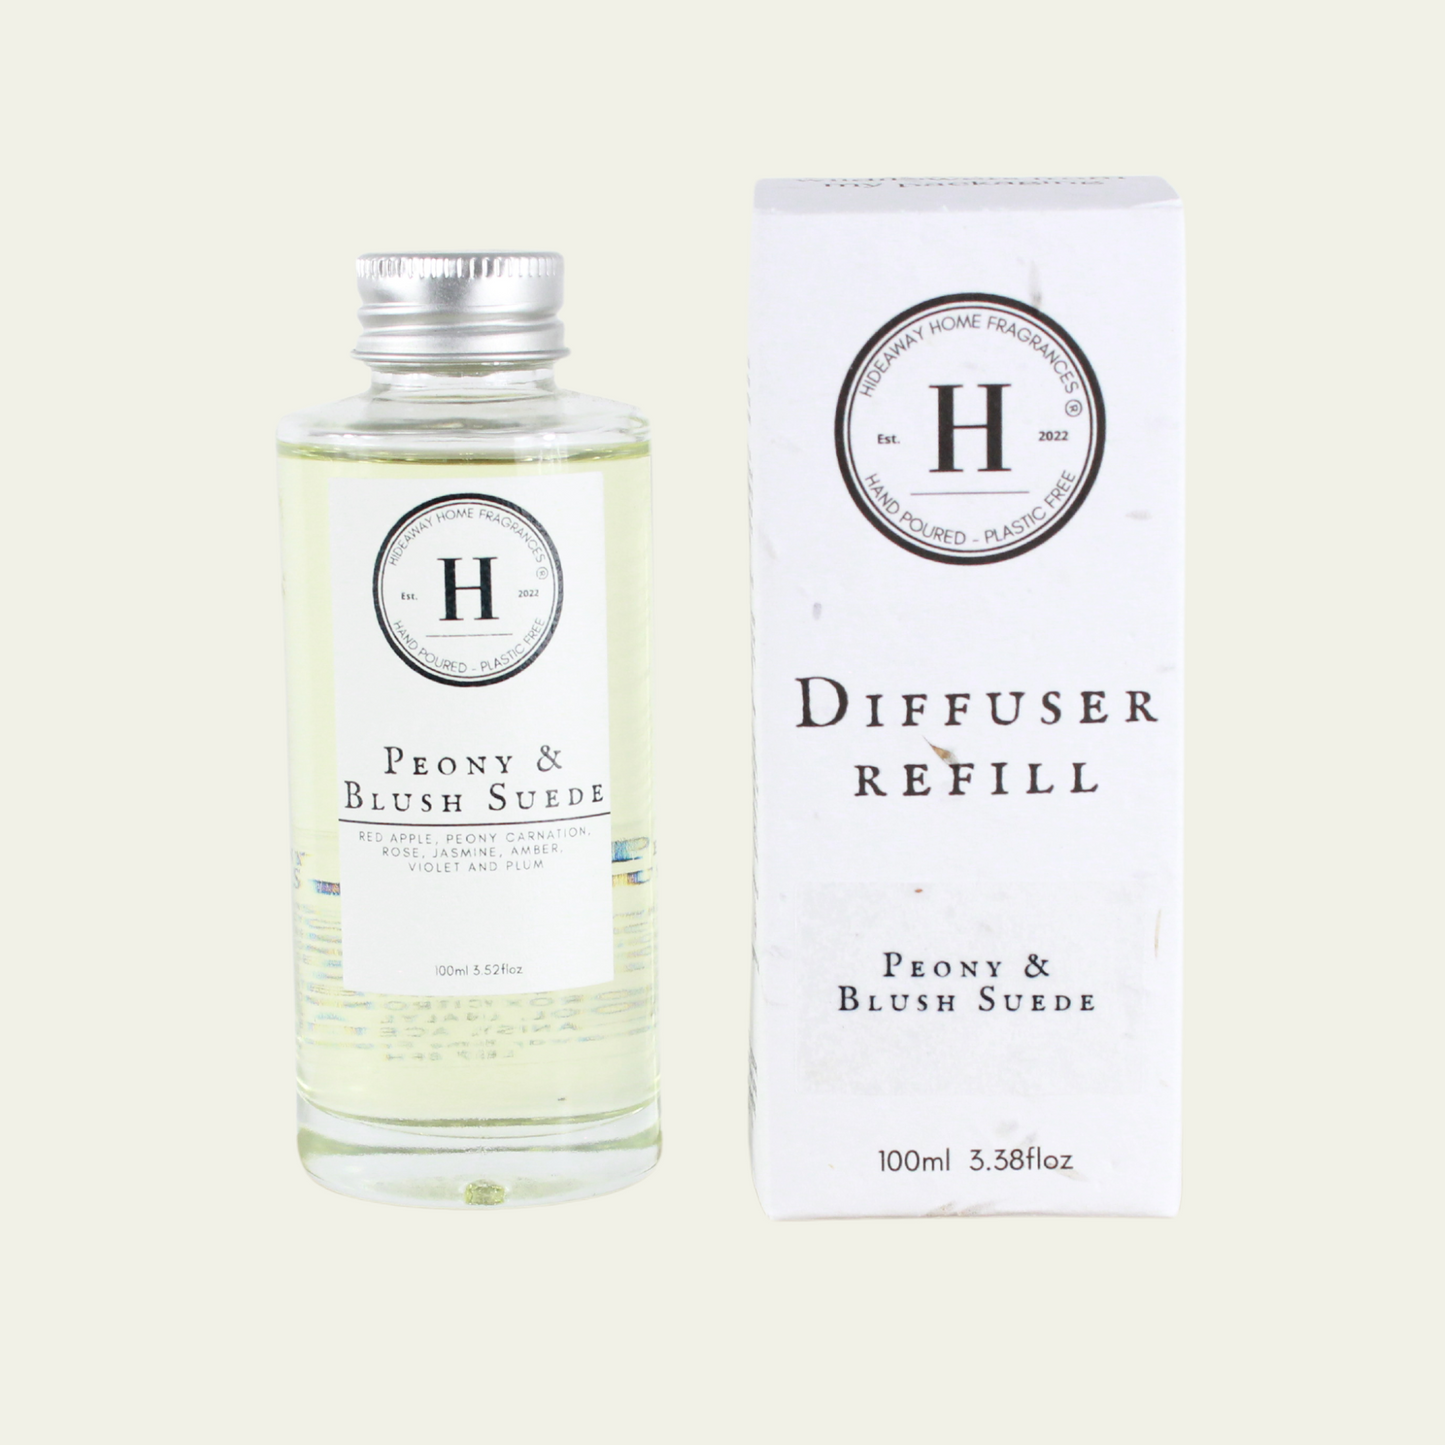 Peony & Blush Suede Diffuser Refill - Hideaway Home Fragrances